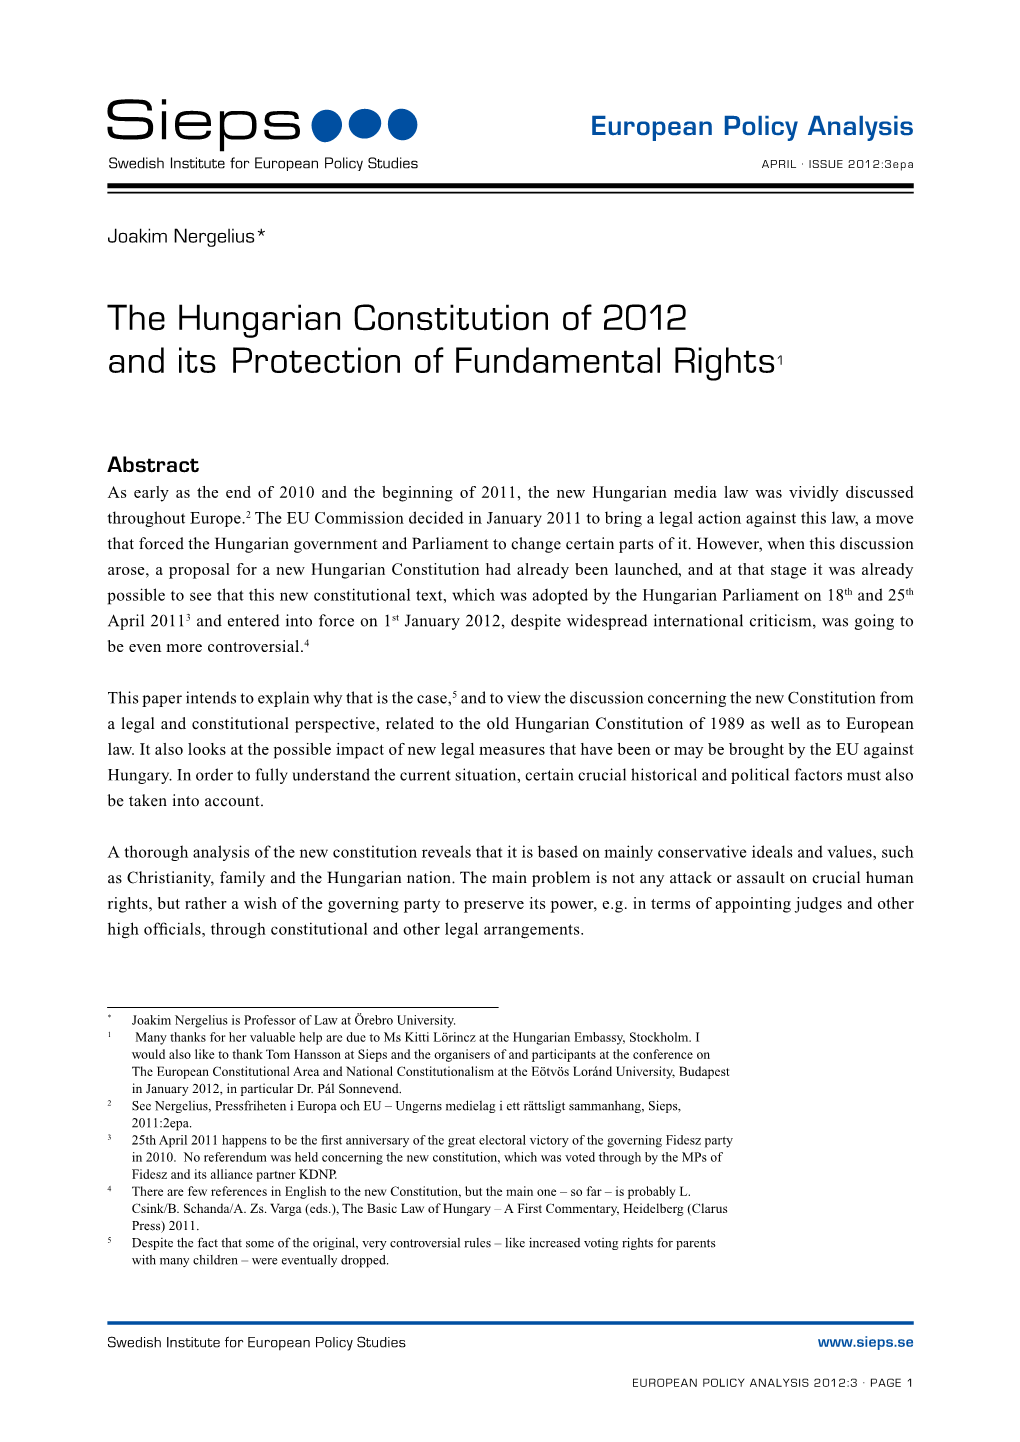 The Hungarian Constitution of 2012 and Its Protection of Fundamental Rights1